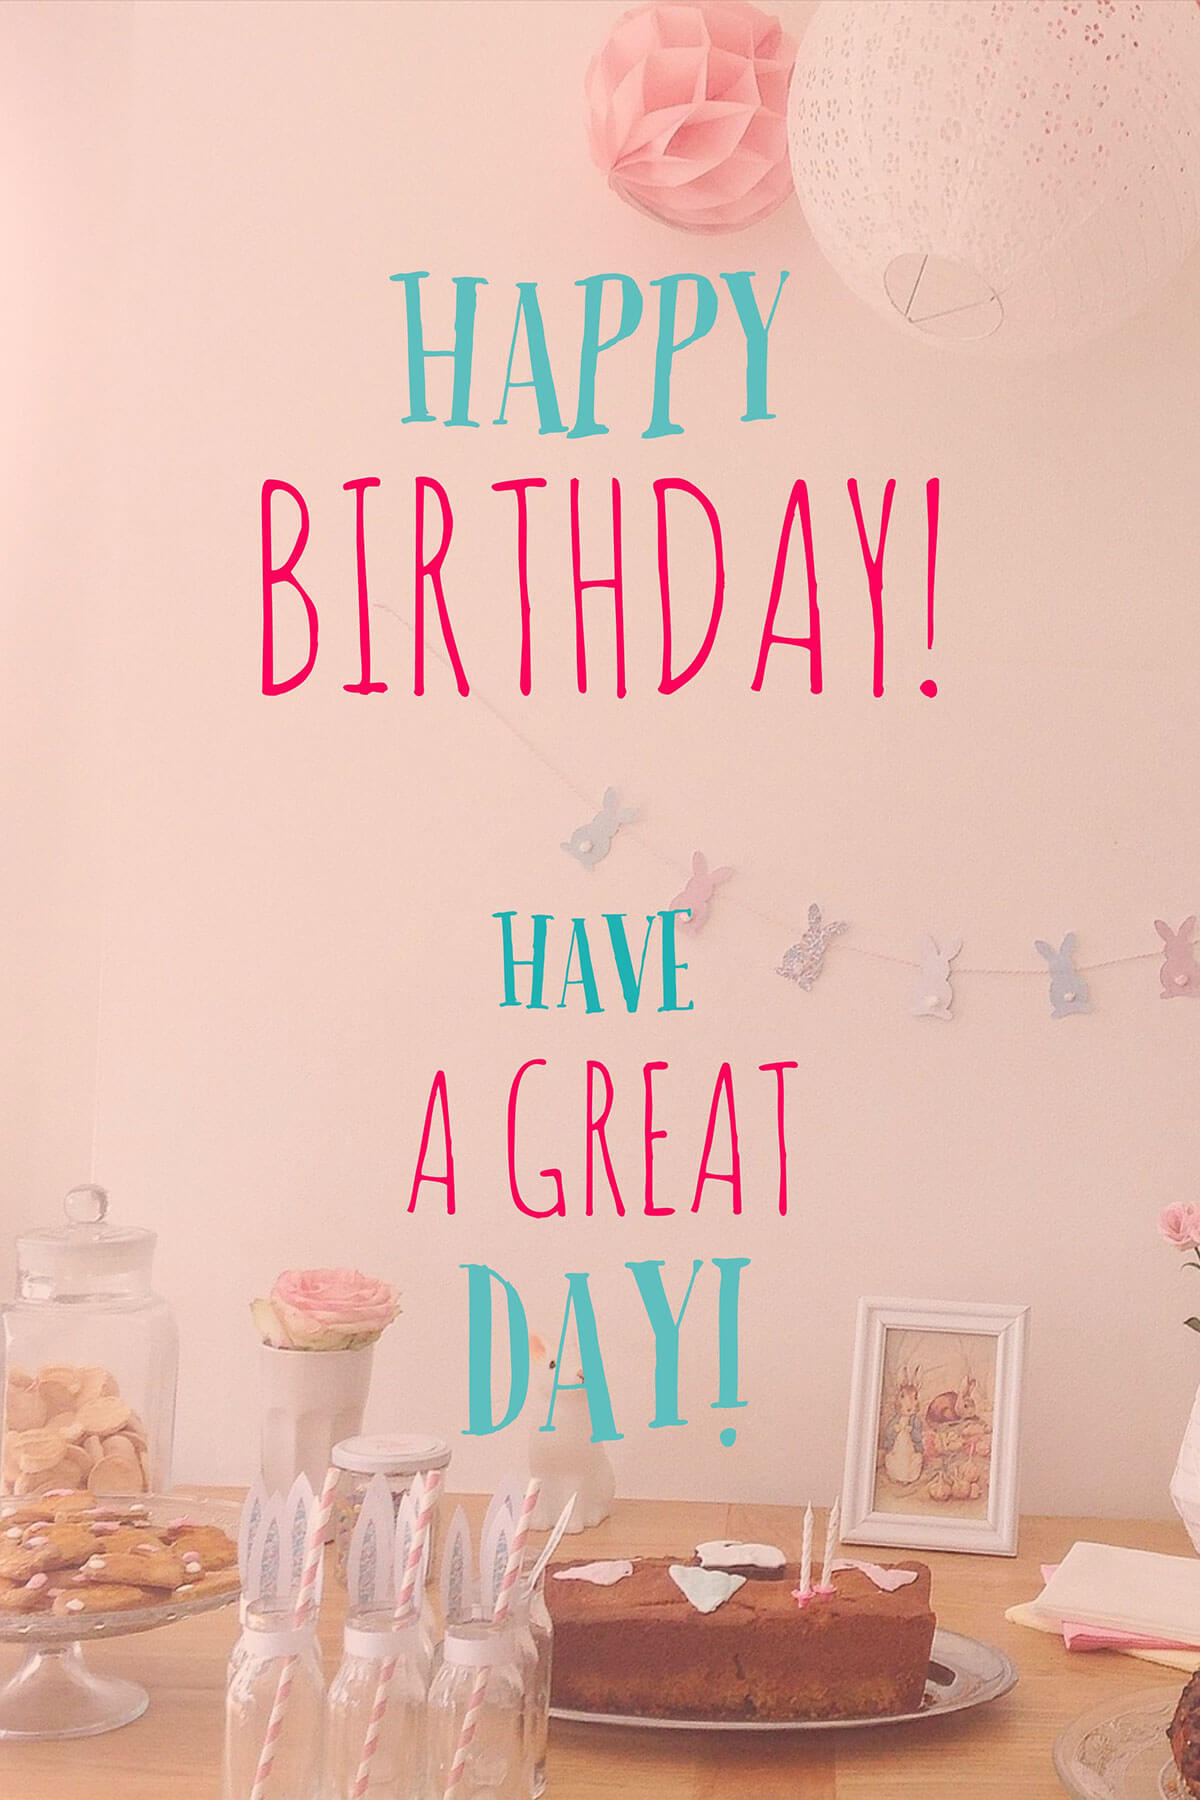 Free Online Card Maker: Create Custom Greeting Cards | Adobe Spark - Make Your Own Printable Birthday Cards Online Free